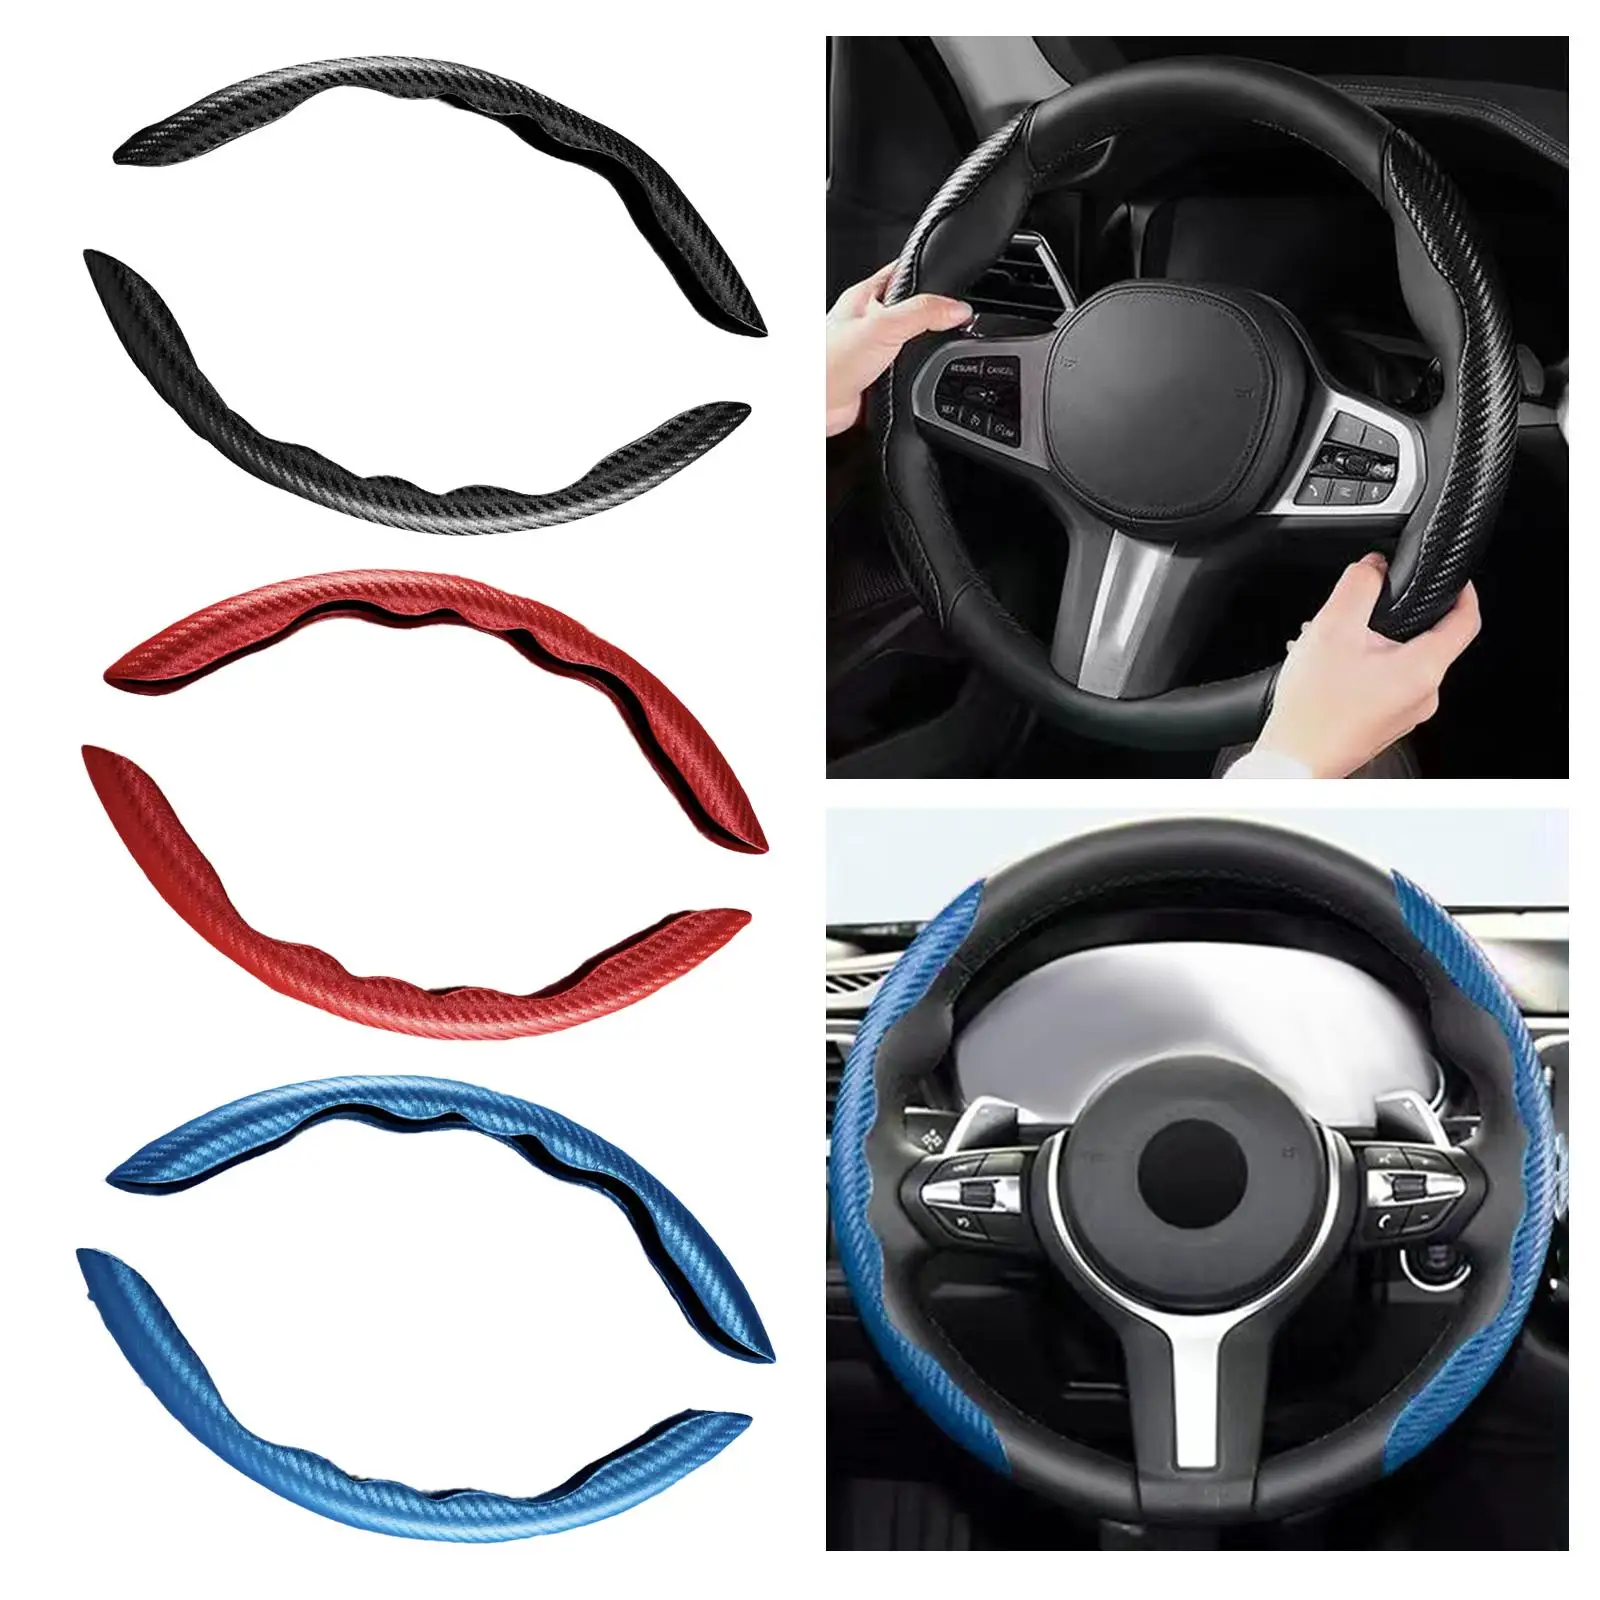 PP Material Steering Wheel Cover Protector Universal Fit 38cm Suitable for All Seasons Convenient Installation Segmented 2Pcs